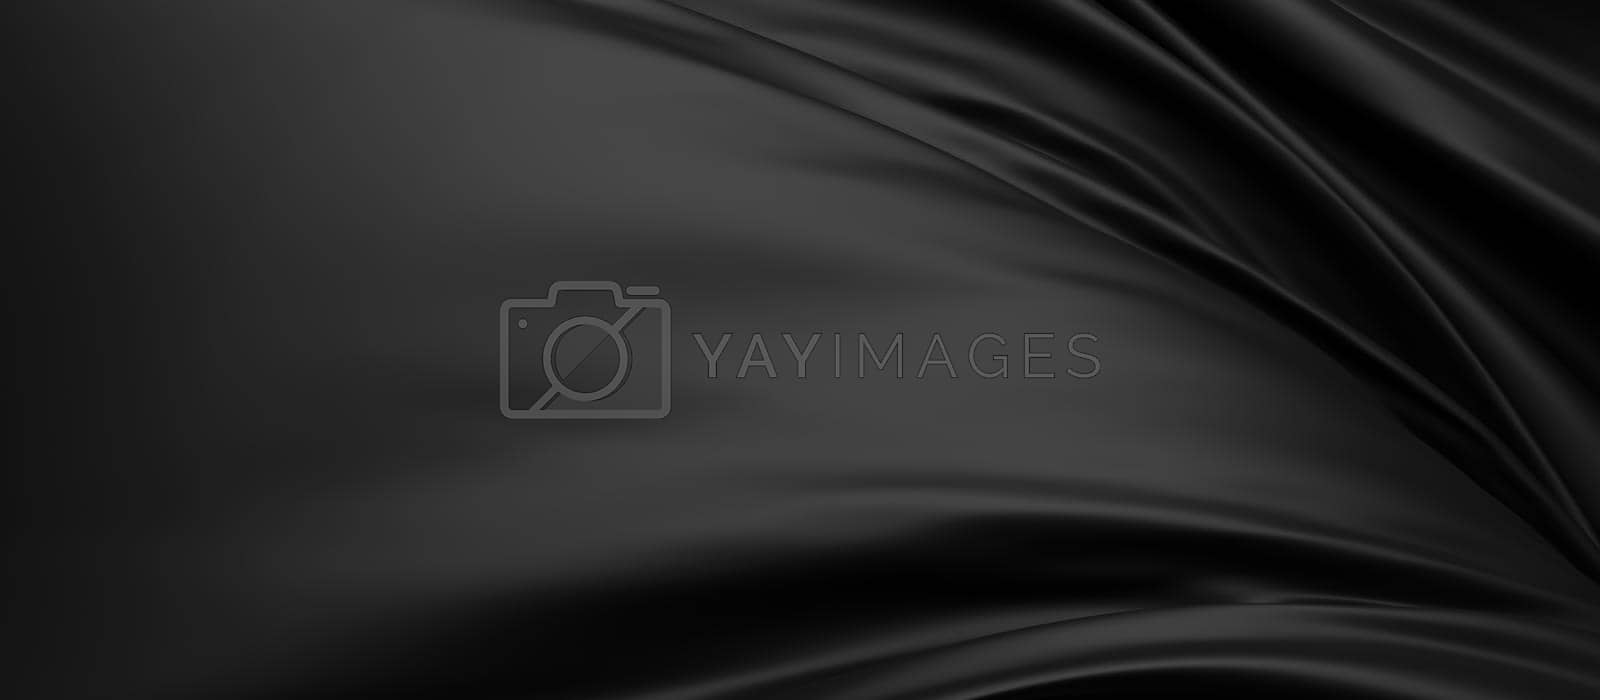 Royalty free image of Abstract black fabric background with copy space 3d render by Myimagine